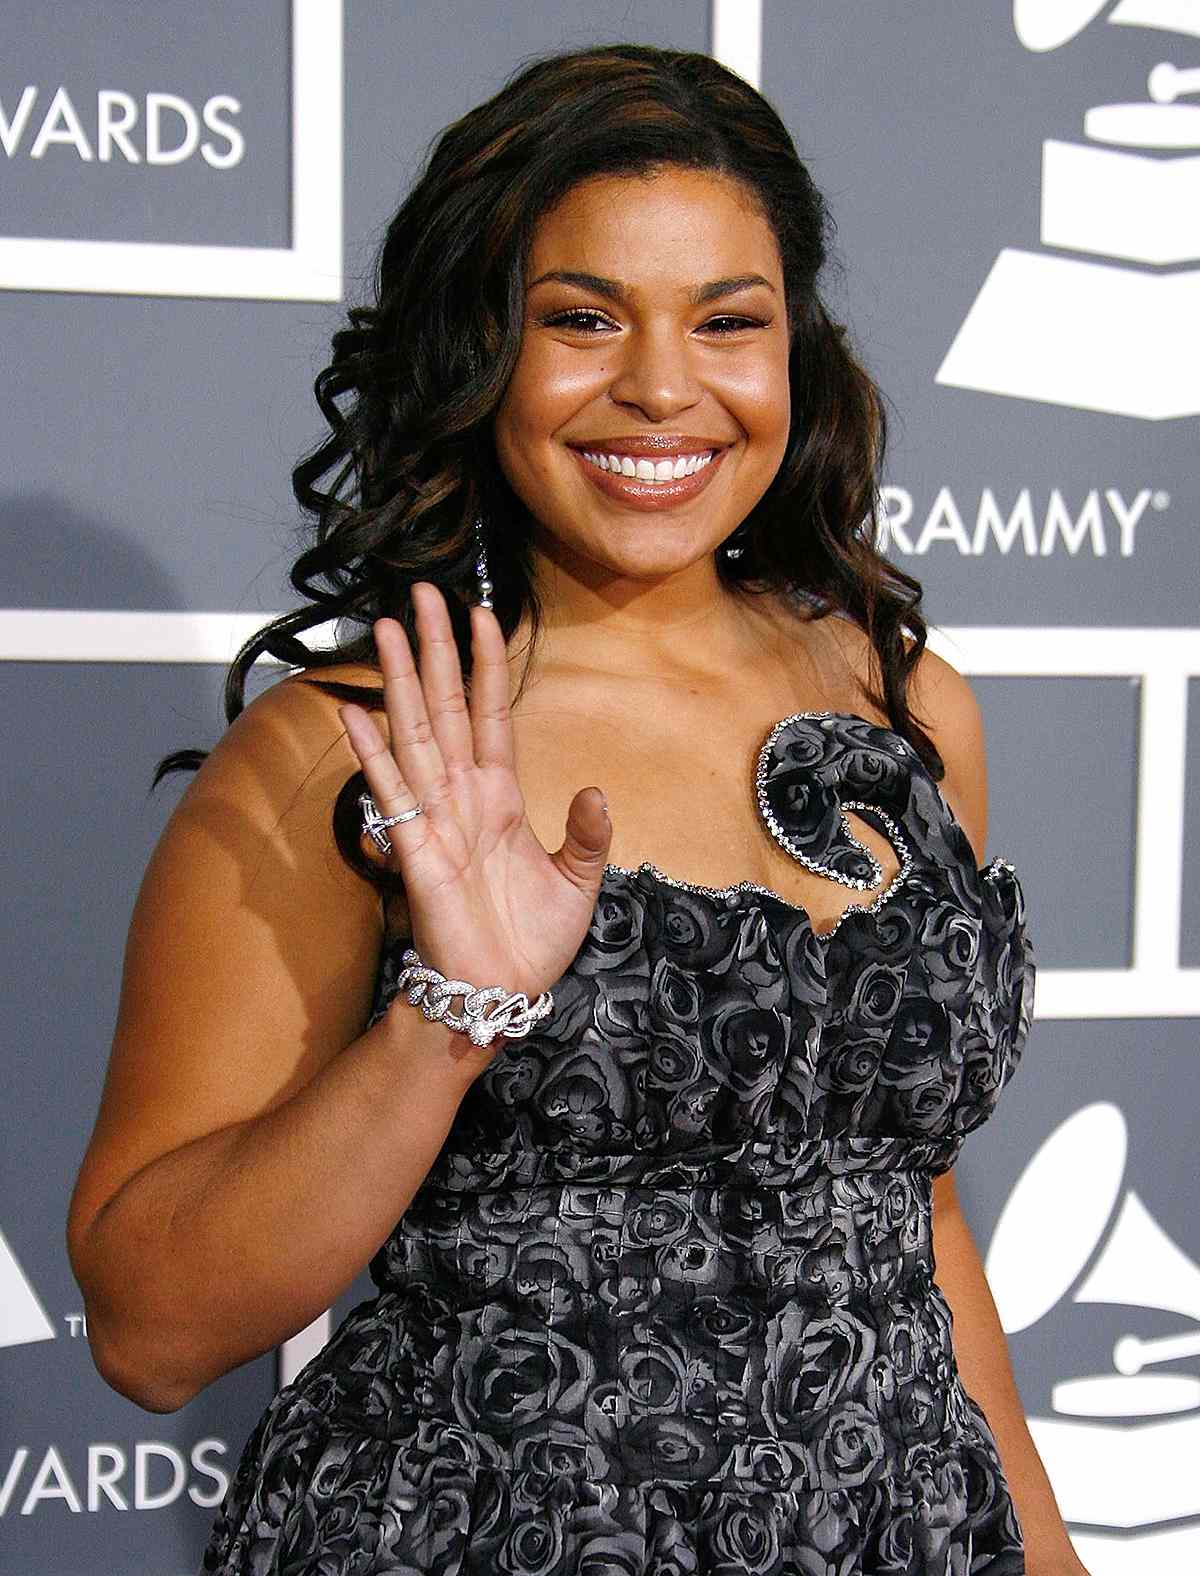 Singer Jordin Sparks arrives to the 51st Annual GRAMMY Awards at the Staples Center on February 8, 2009 in Los Angeles, California.